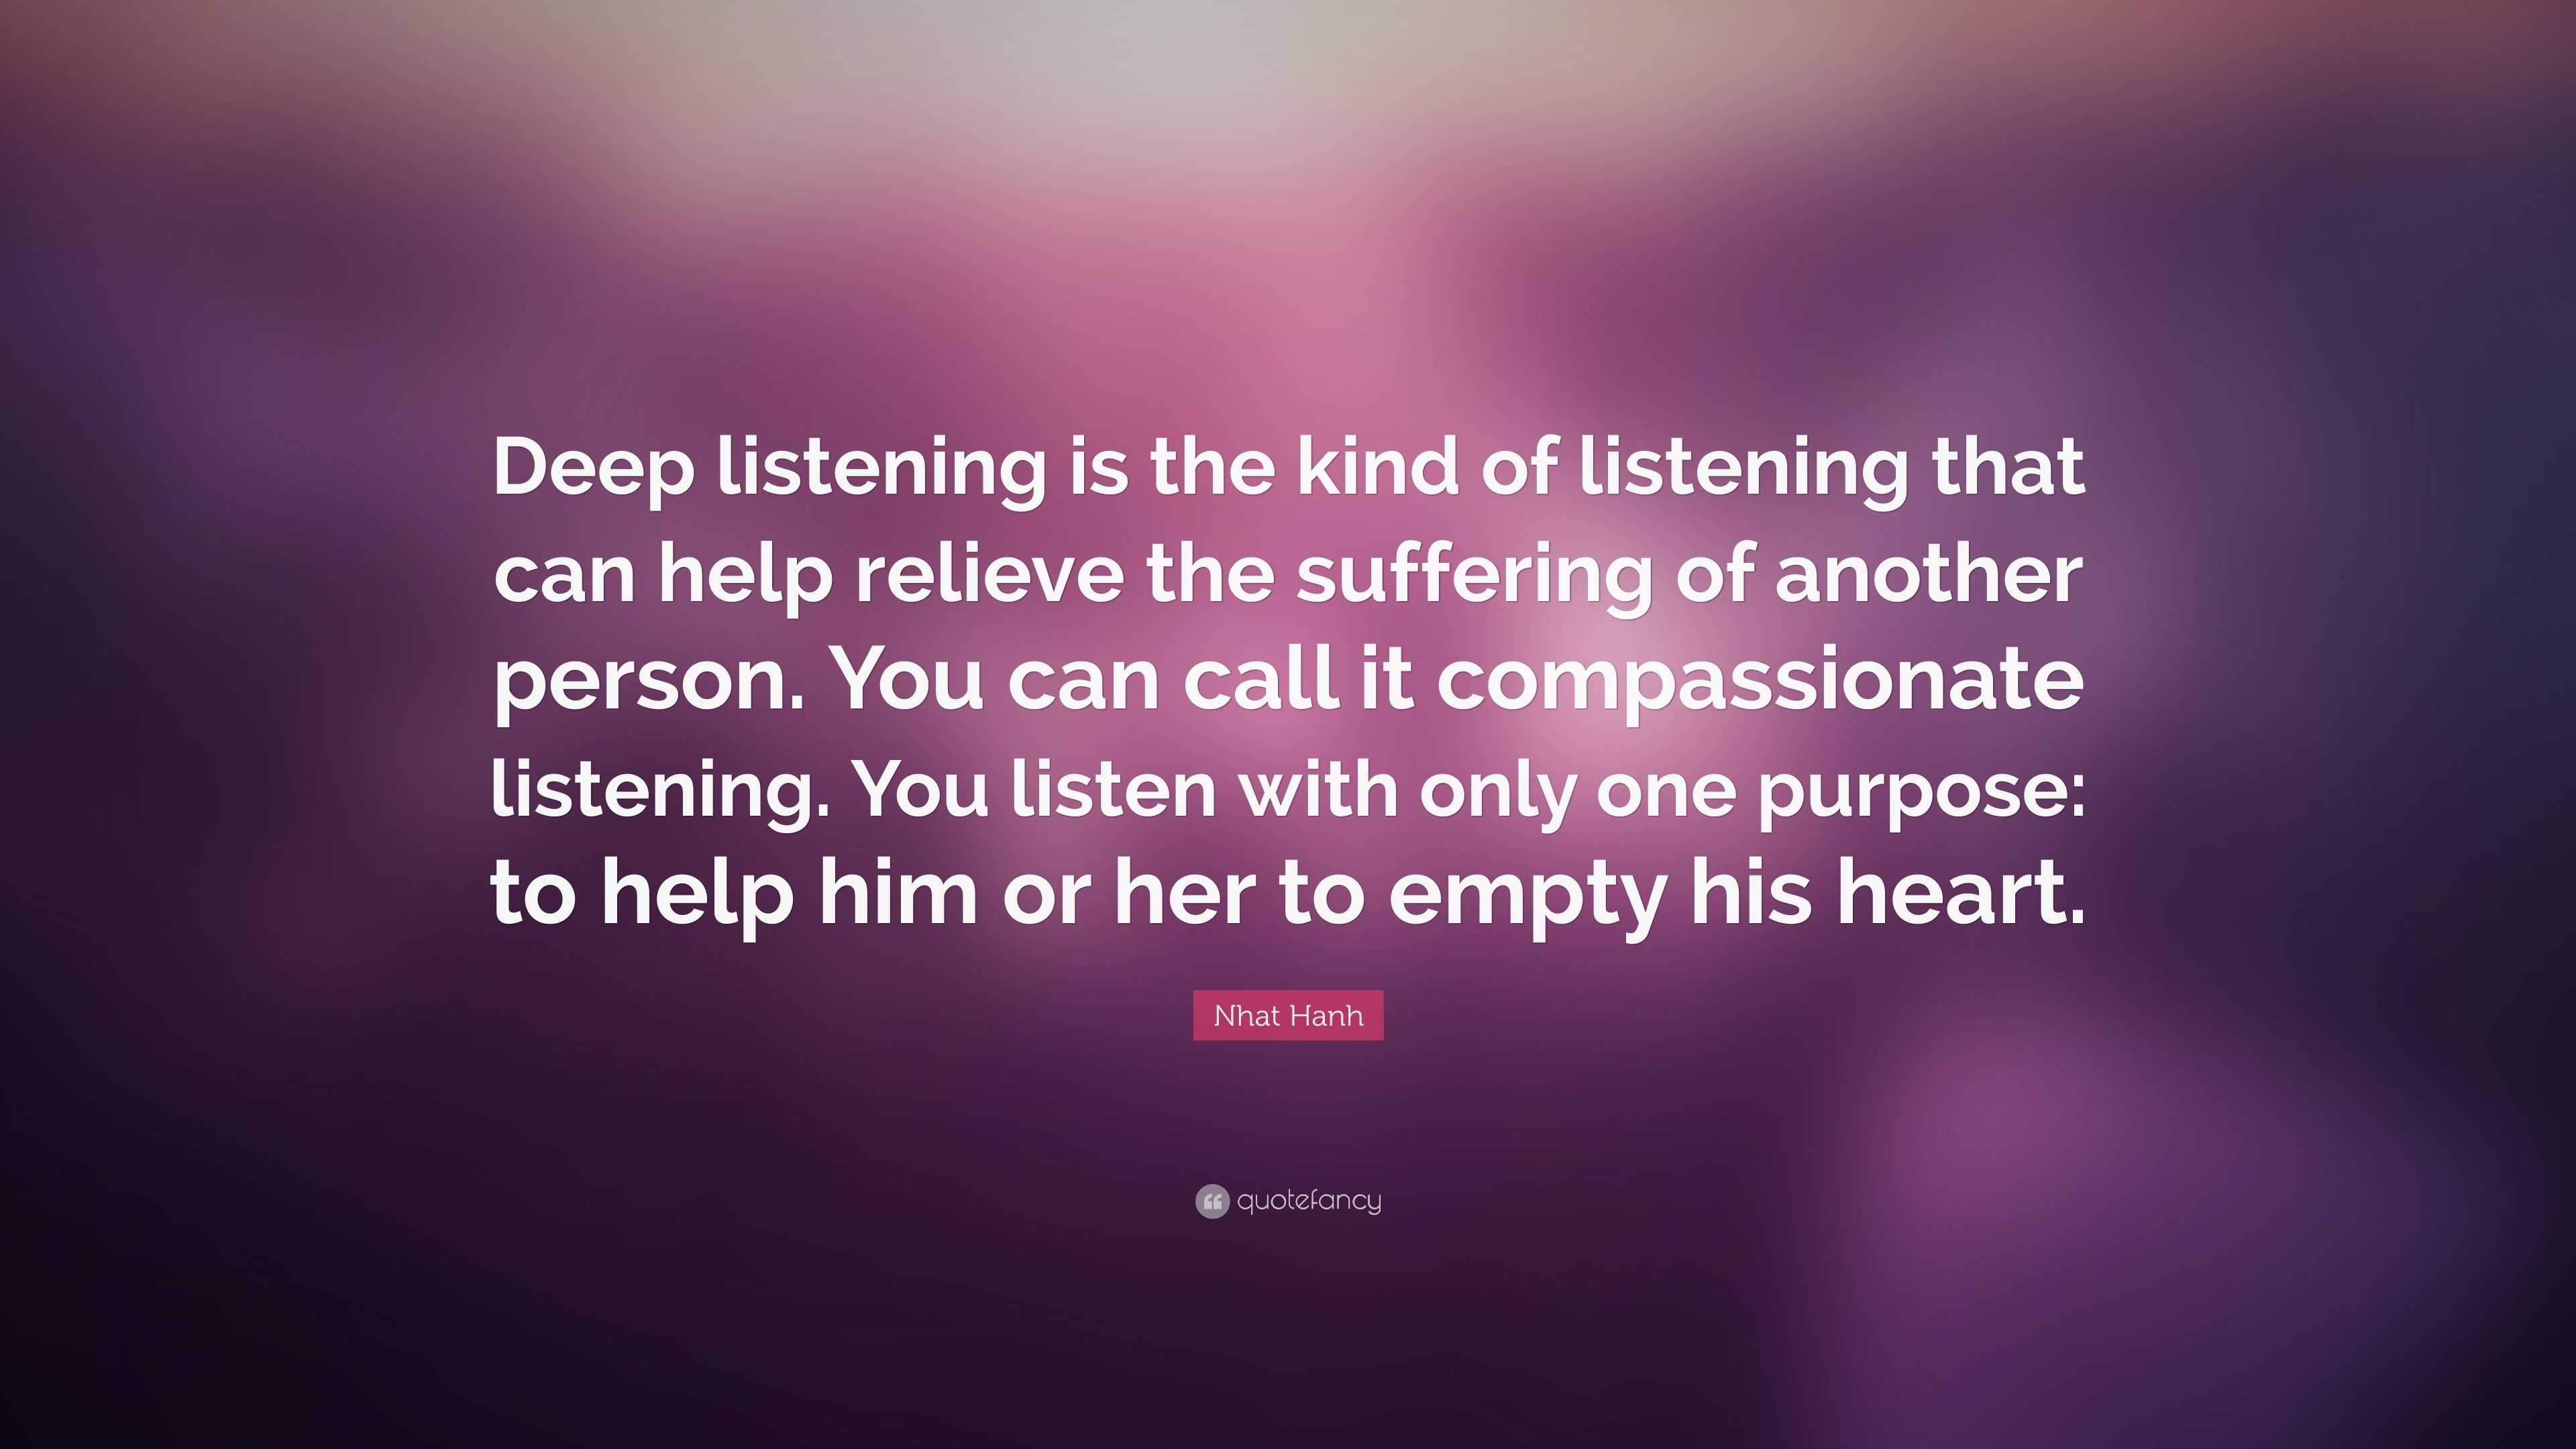 Nhat Hanh Quote: “Deep listening is the kind of listening that can help ...